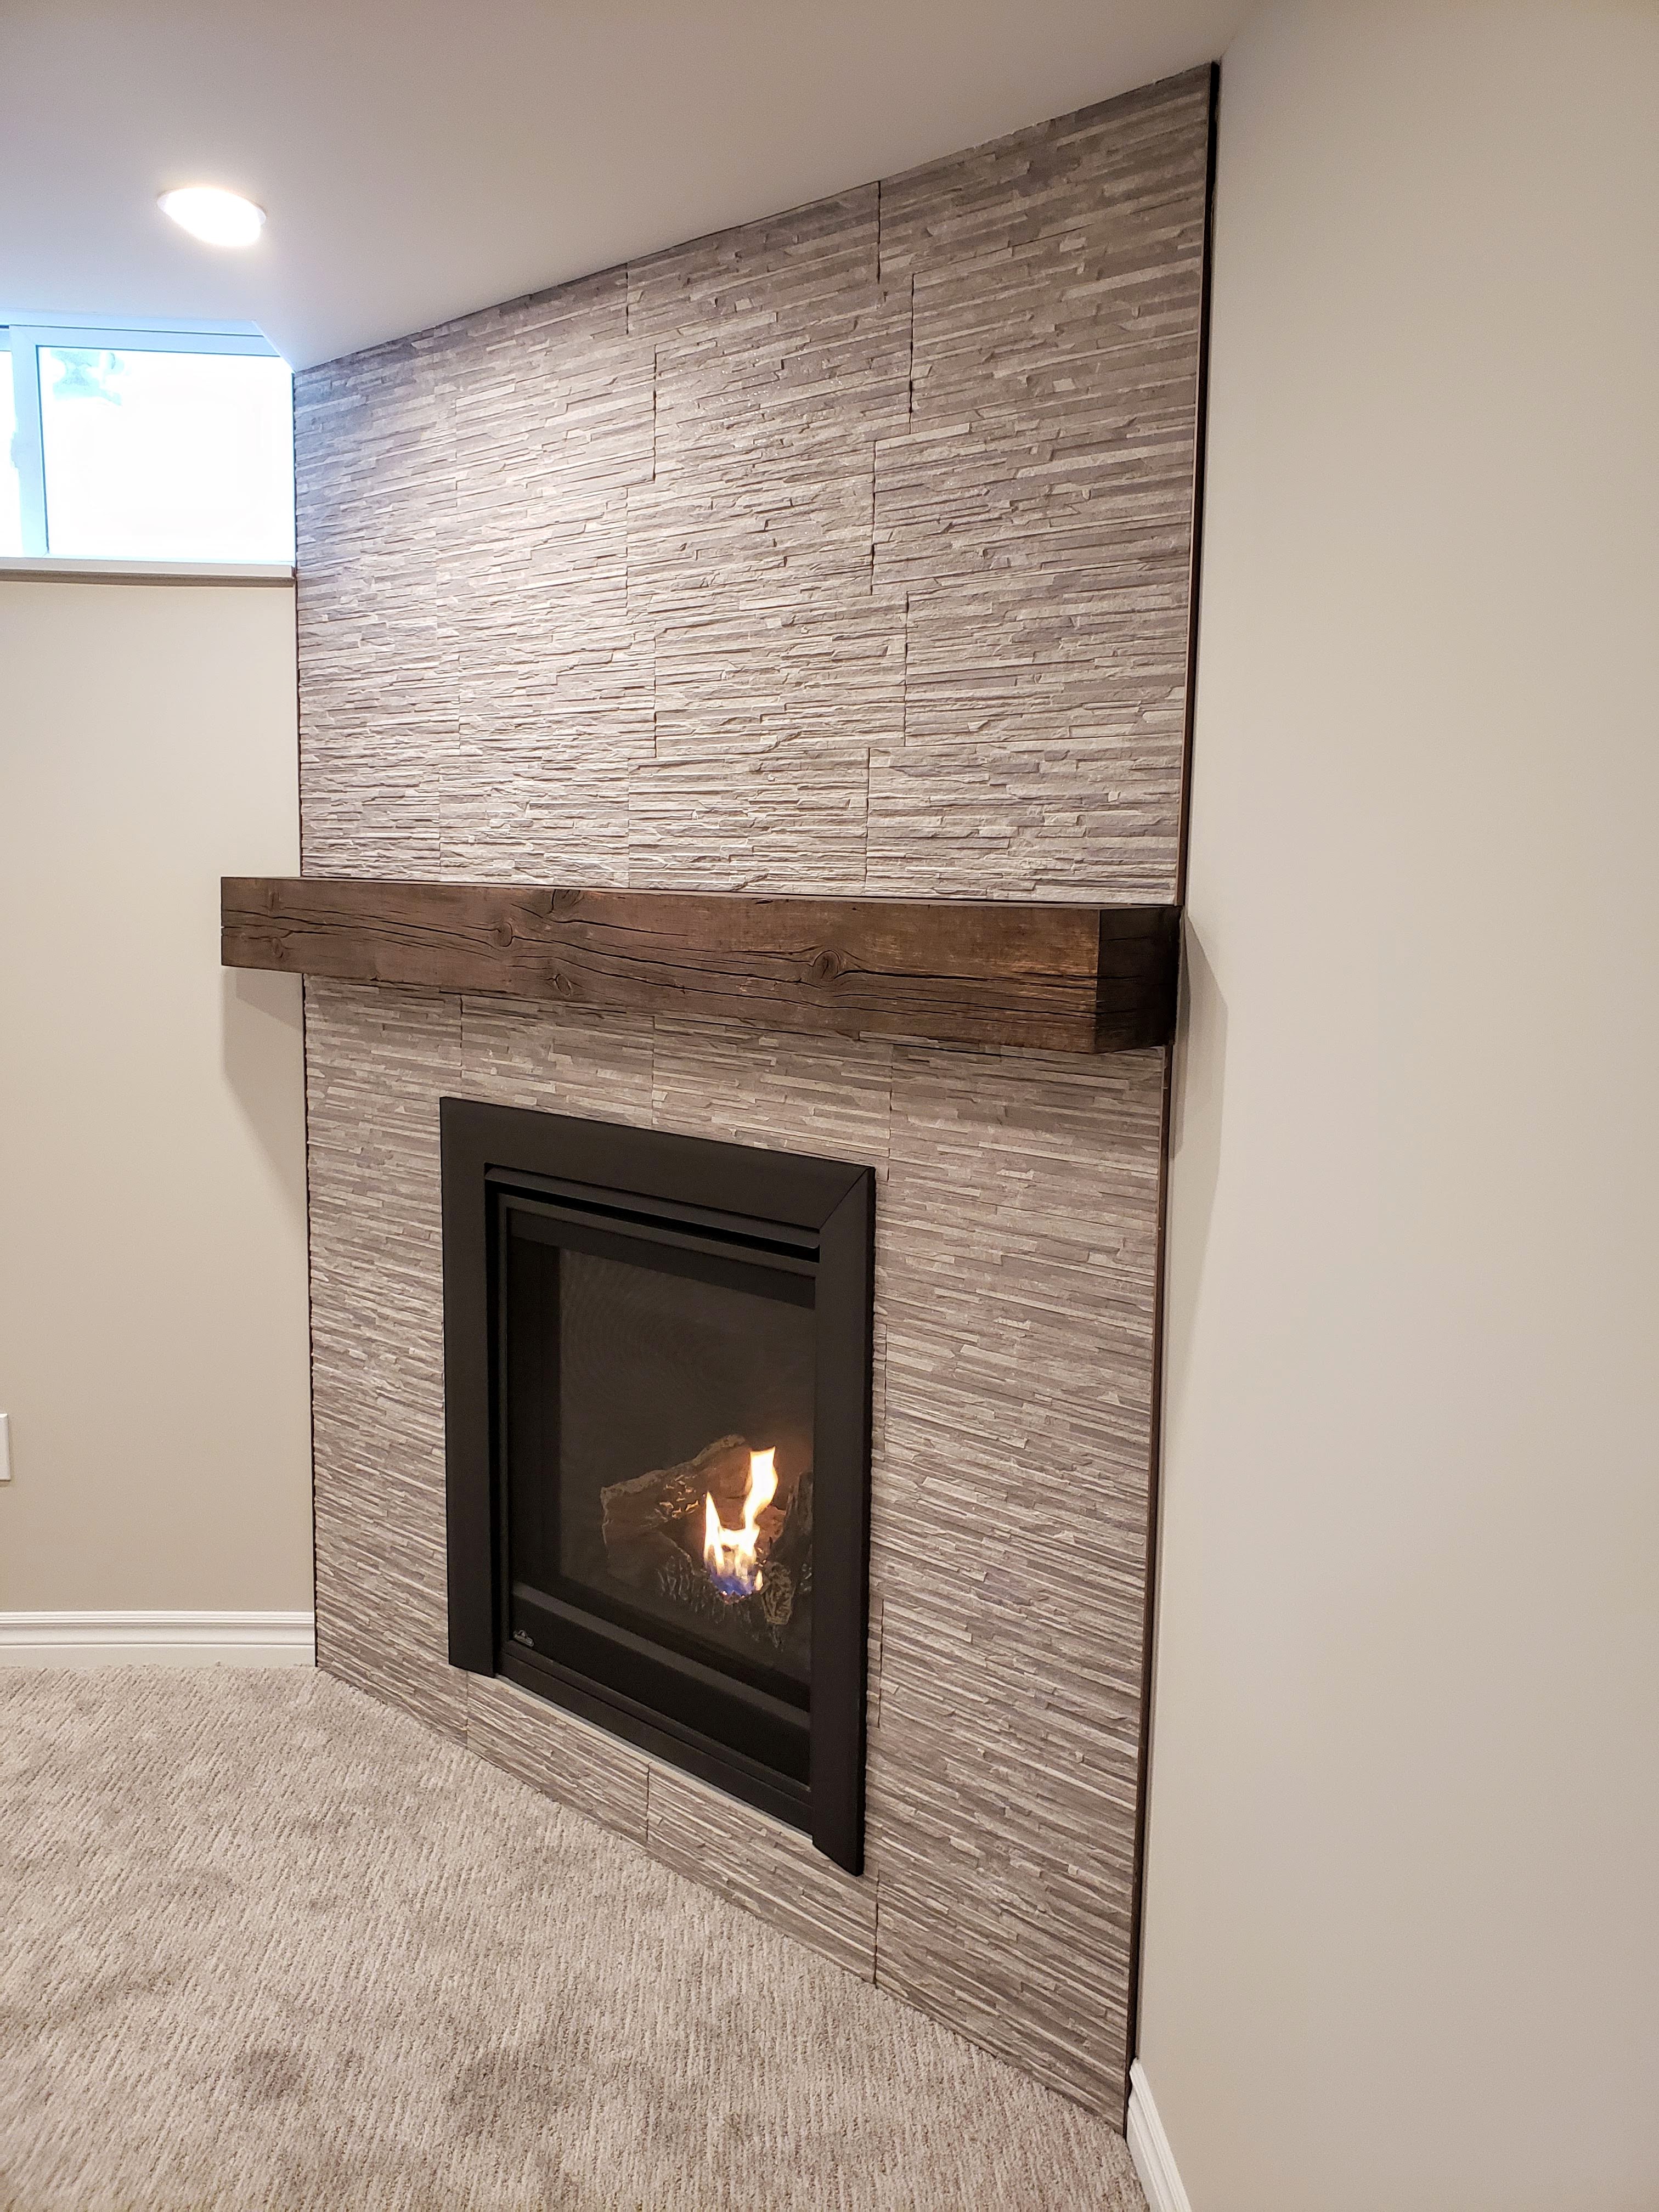 Basement fireplace with tile surround and rustic mantel by Germano Creative Interior Contracting Ltd.